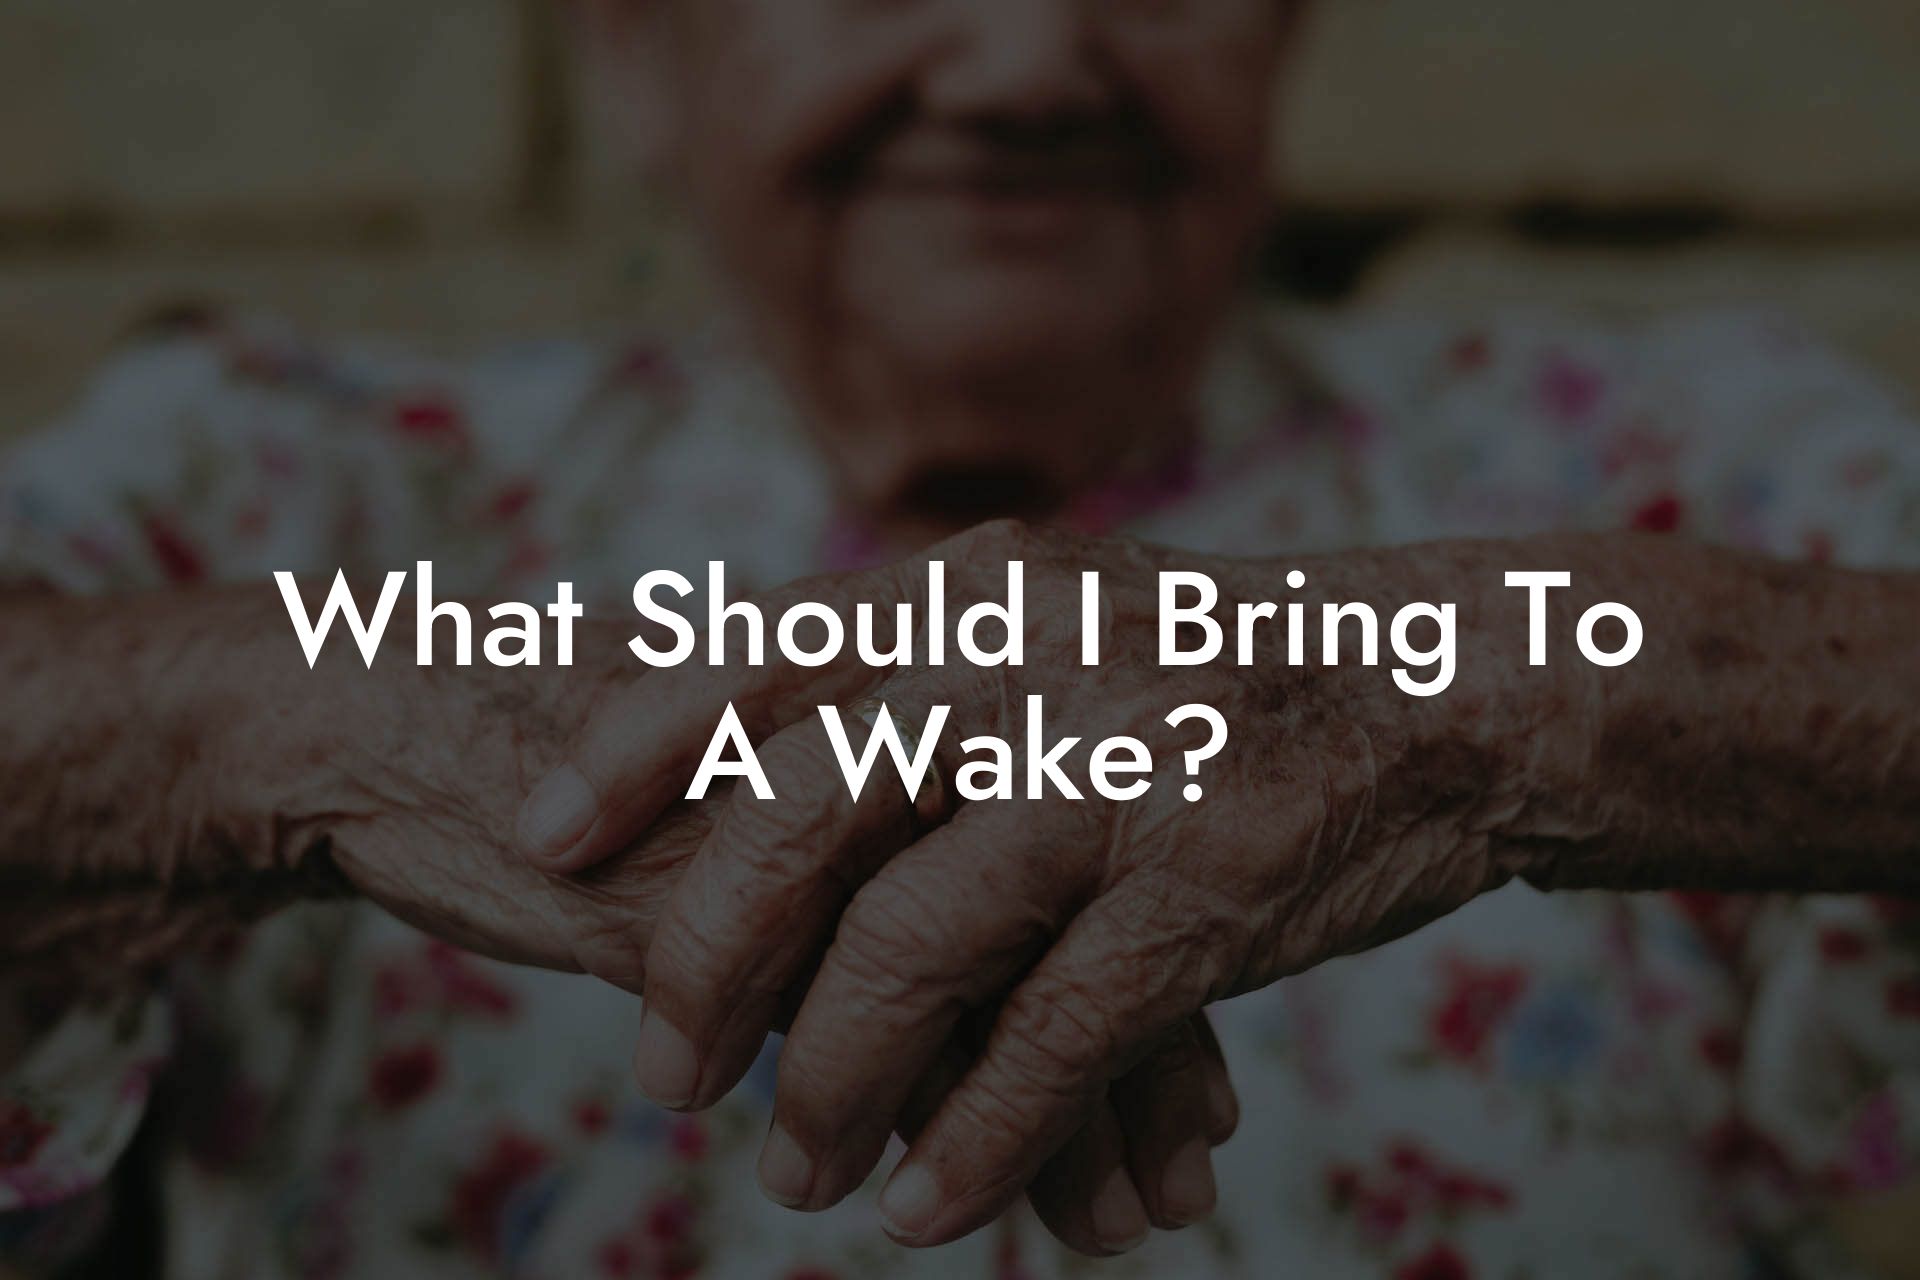 What Should I Bring To A Wake?